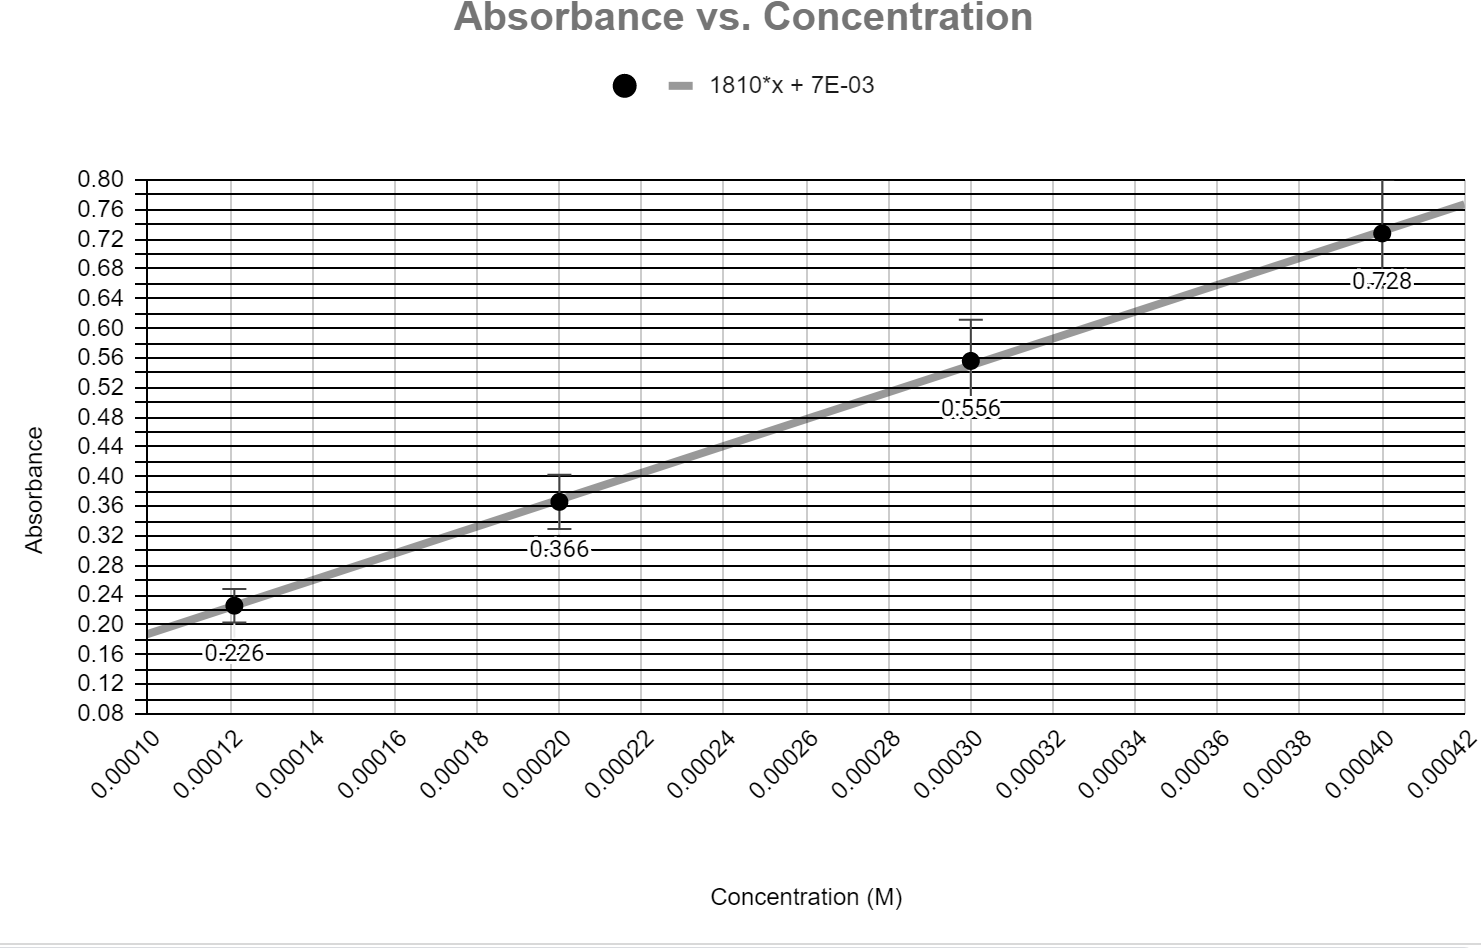 Absorbance vs. Concentration 1810*x + 7E-03 -0-7:28 20:556 Absorbance 0.80 0.76 0.72 0.68 0.64 0.60 0.56 0.52 0.48 0.44 0.40 